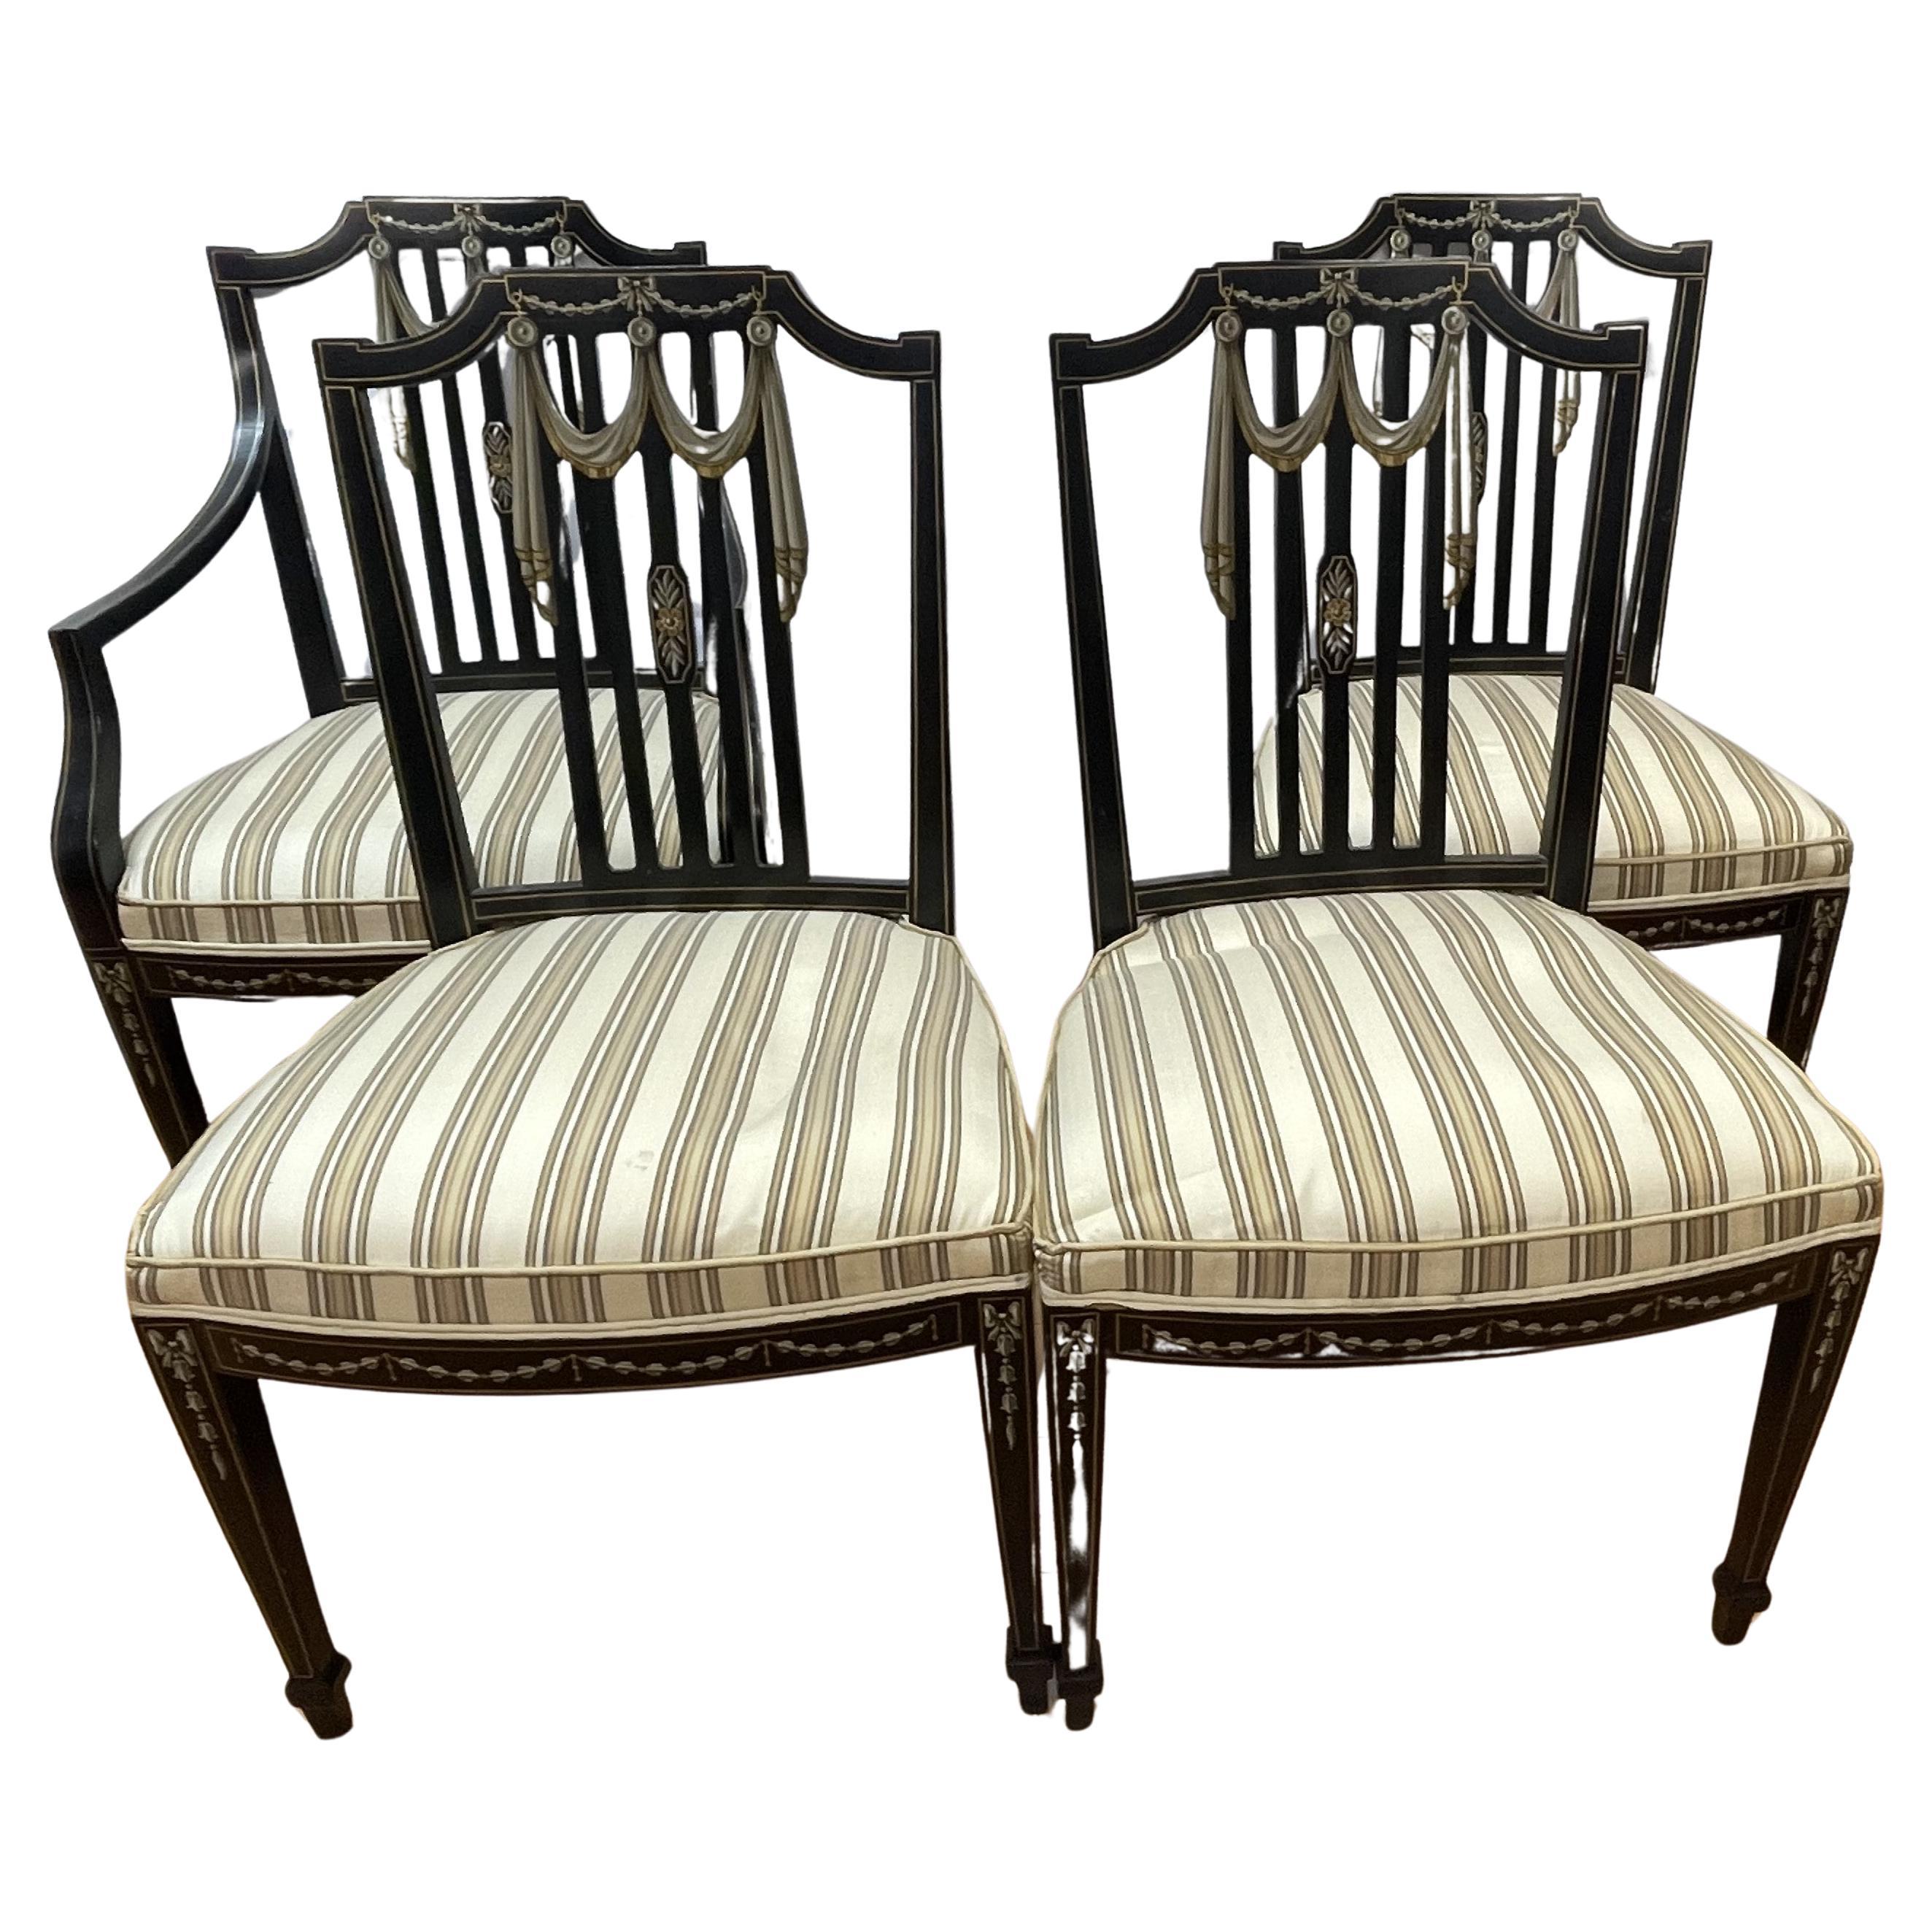 Four Sheraton chairs For Sale